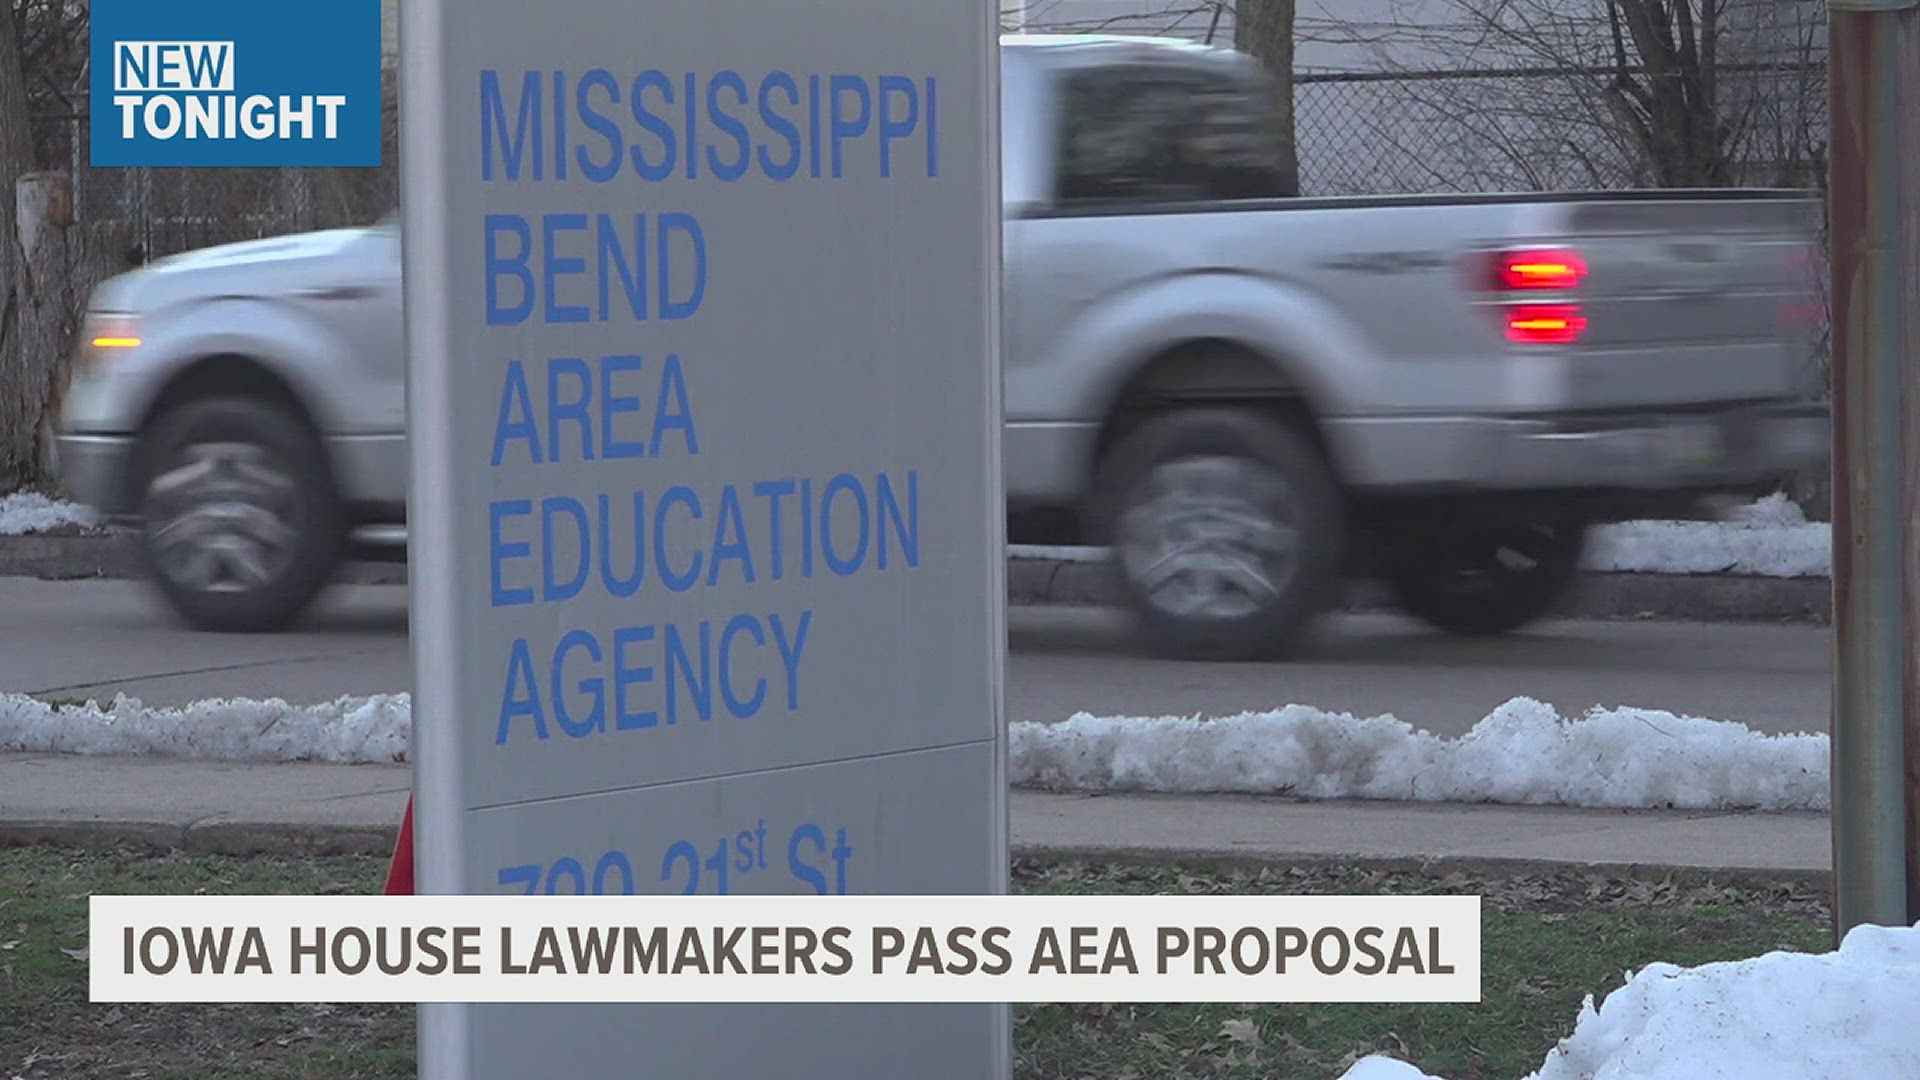 The bill would allow school districts to seek outside help fulfilling the services usually provided by AEAs.